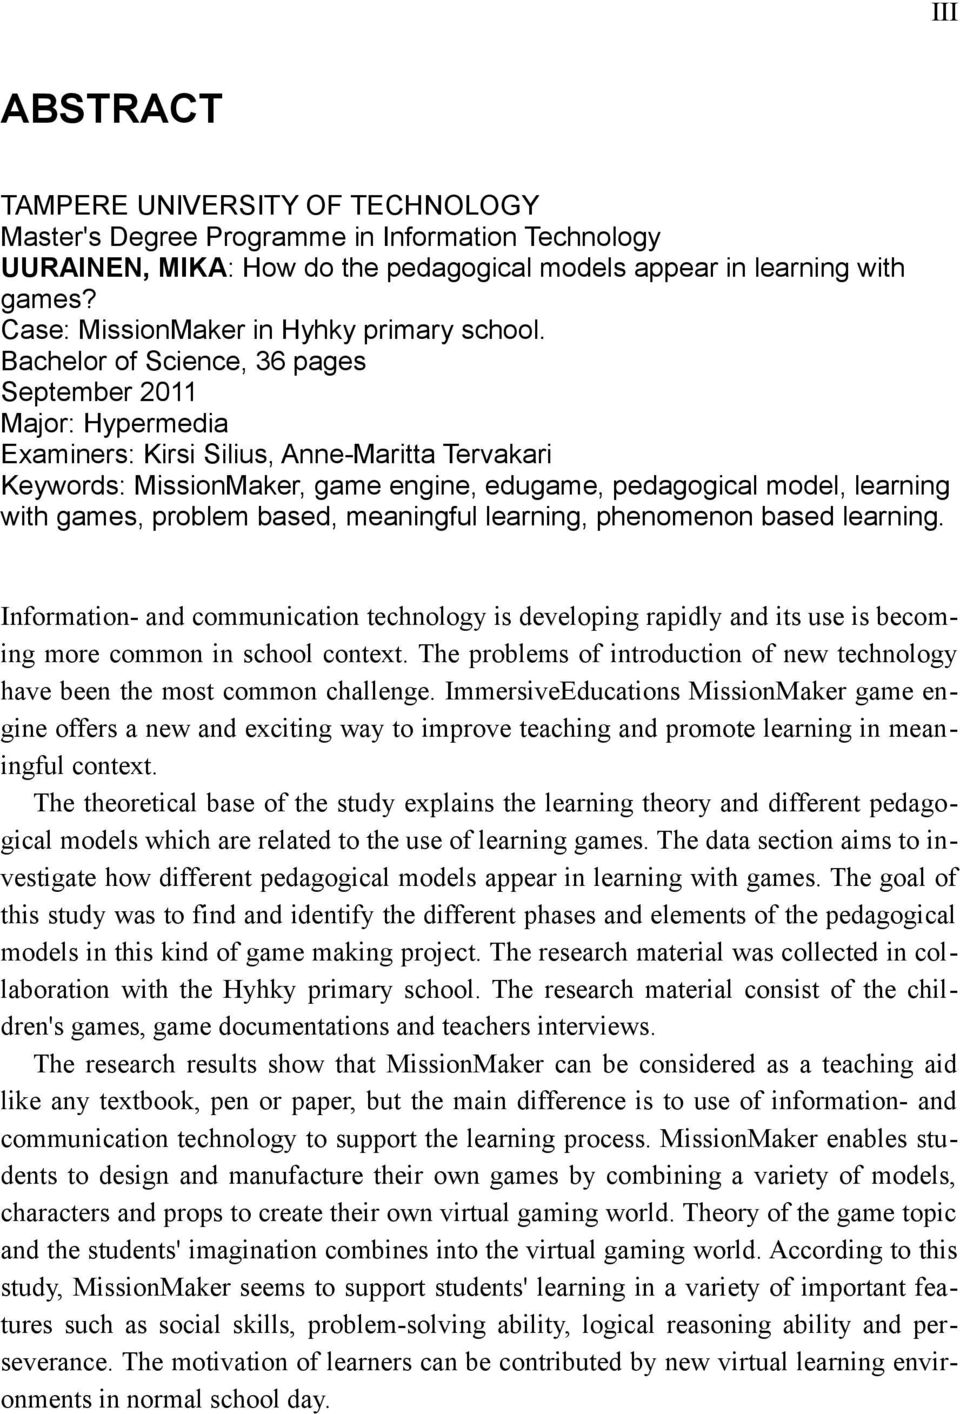 Bachelor of Science, 36 pages September 2011 Major: Hypermedia Examiners: Kirsi Silius, Anne-Maritta Tervakari Keywords: MissionMaker, game engine, edugame, pedagogical model, learning with games,